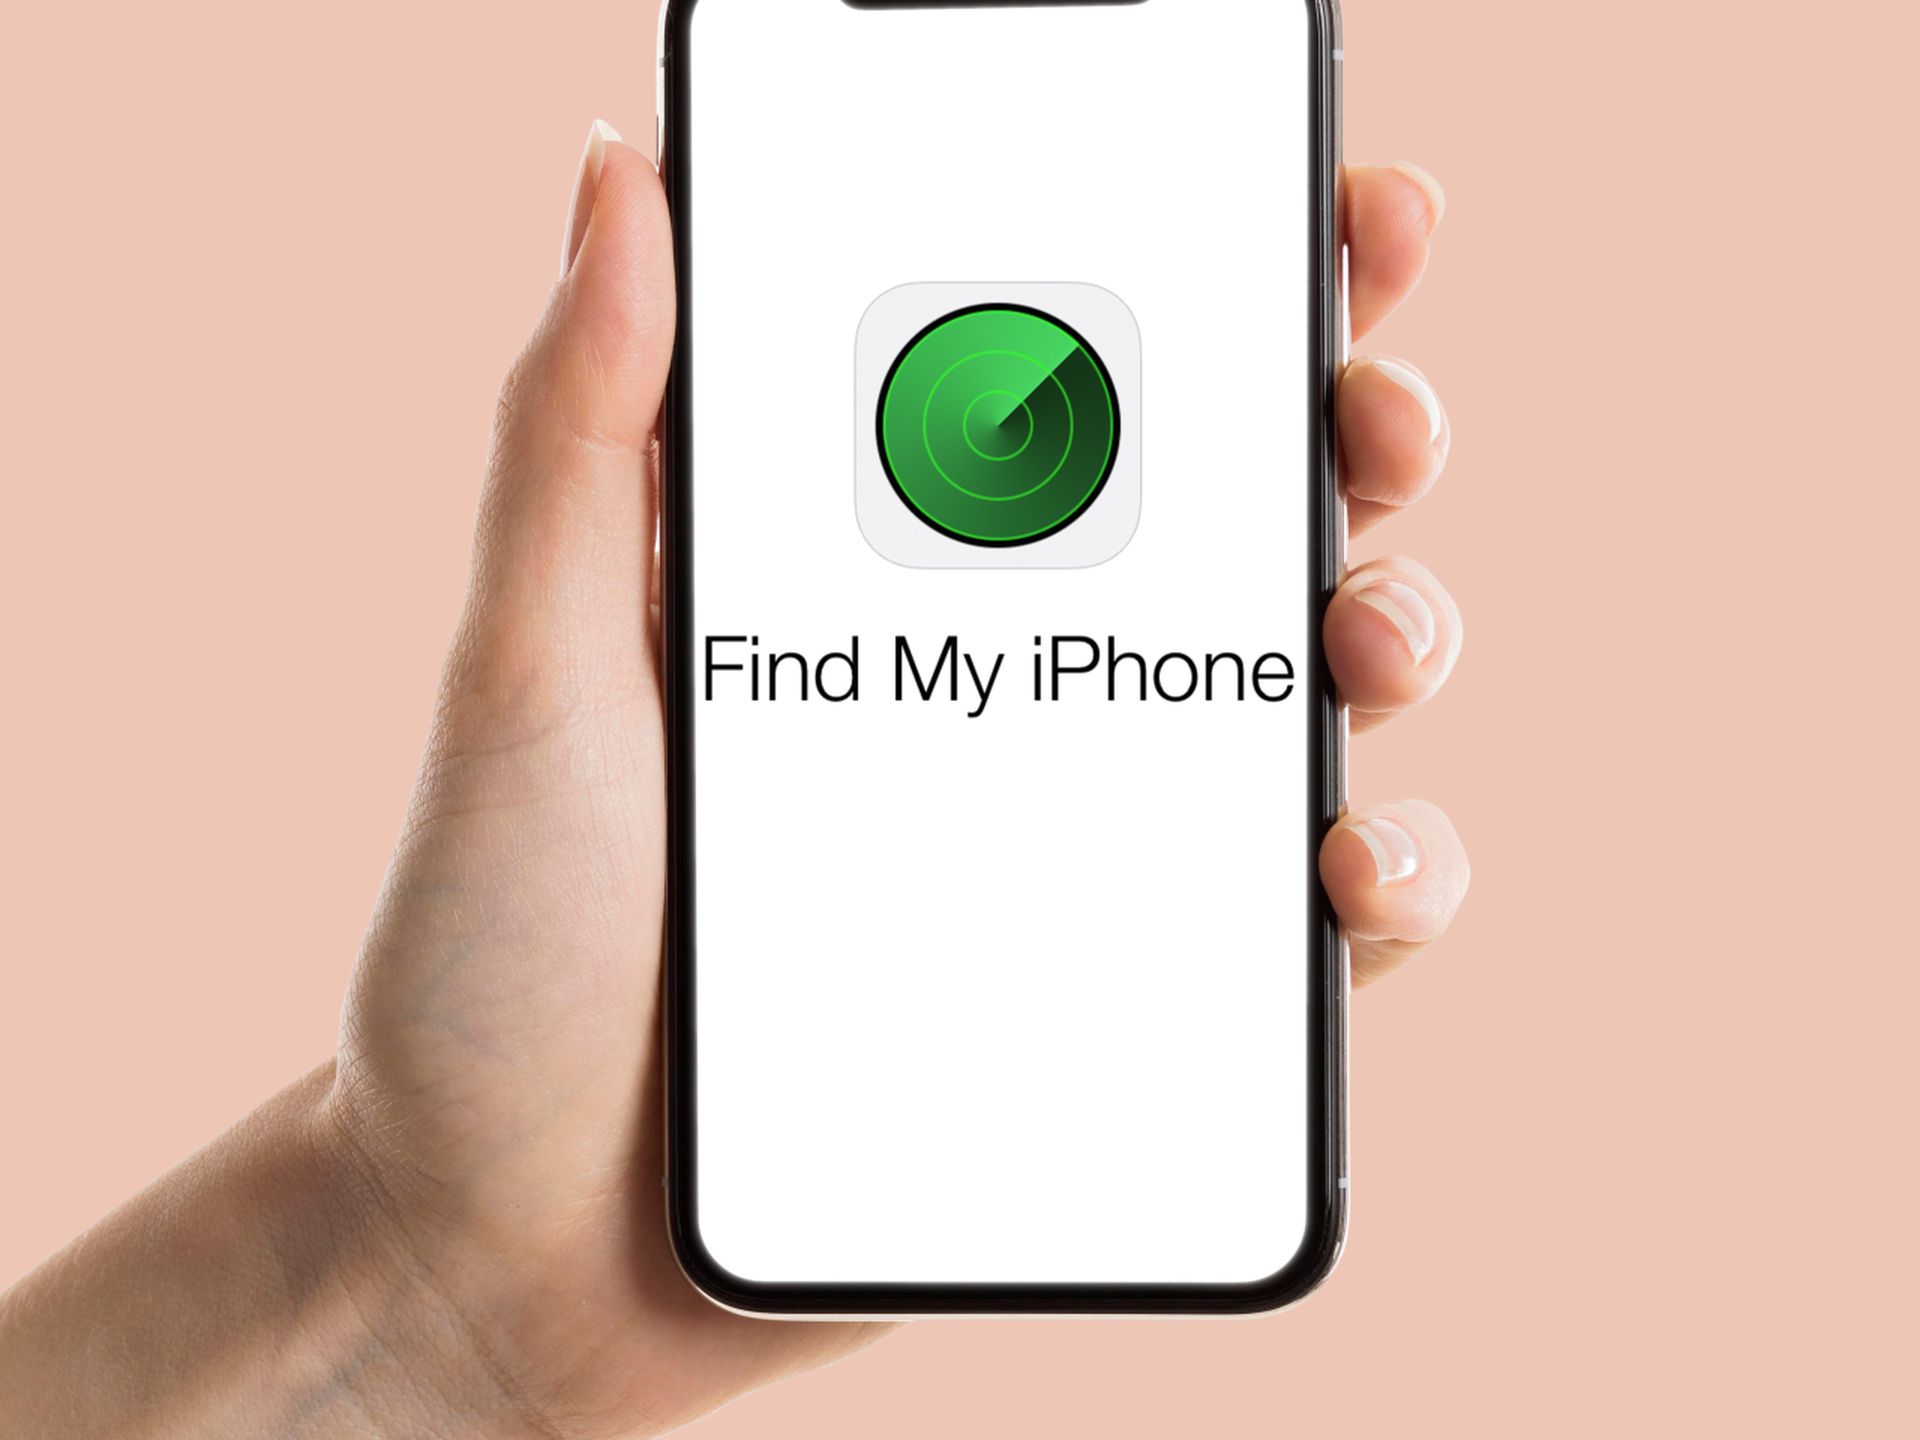 In this article, we are going to be covering No location found iPhone meaning and how to fix it, so you can use your device without any problems.